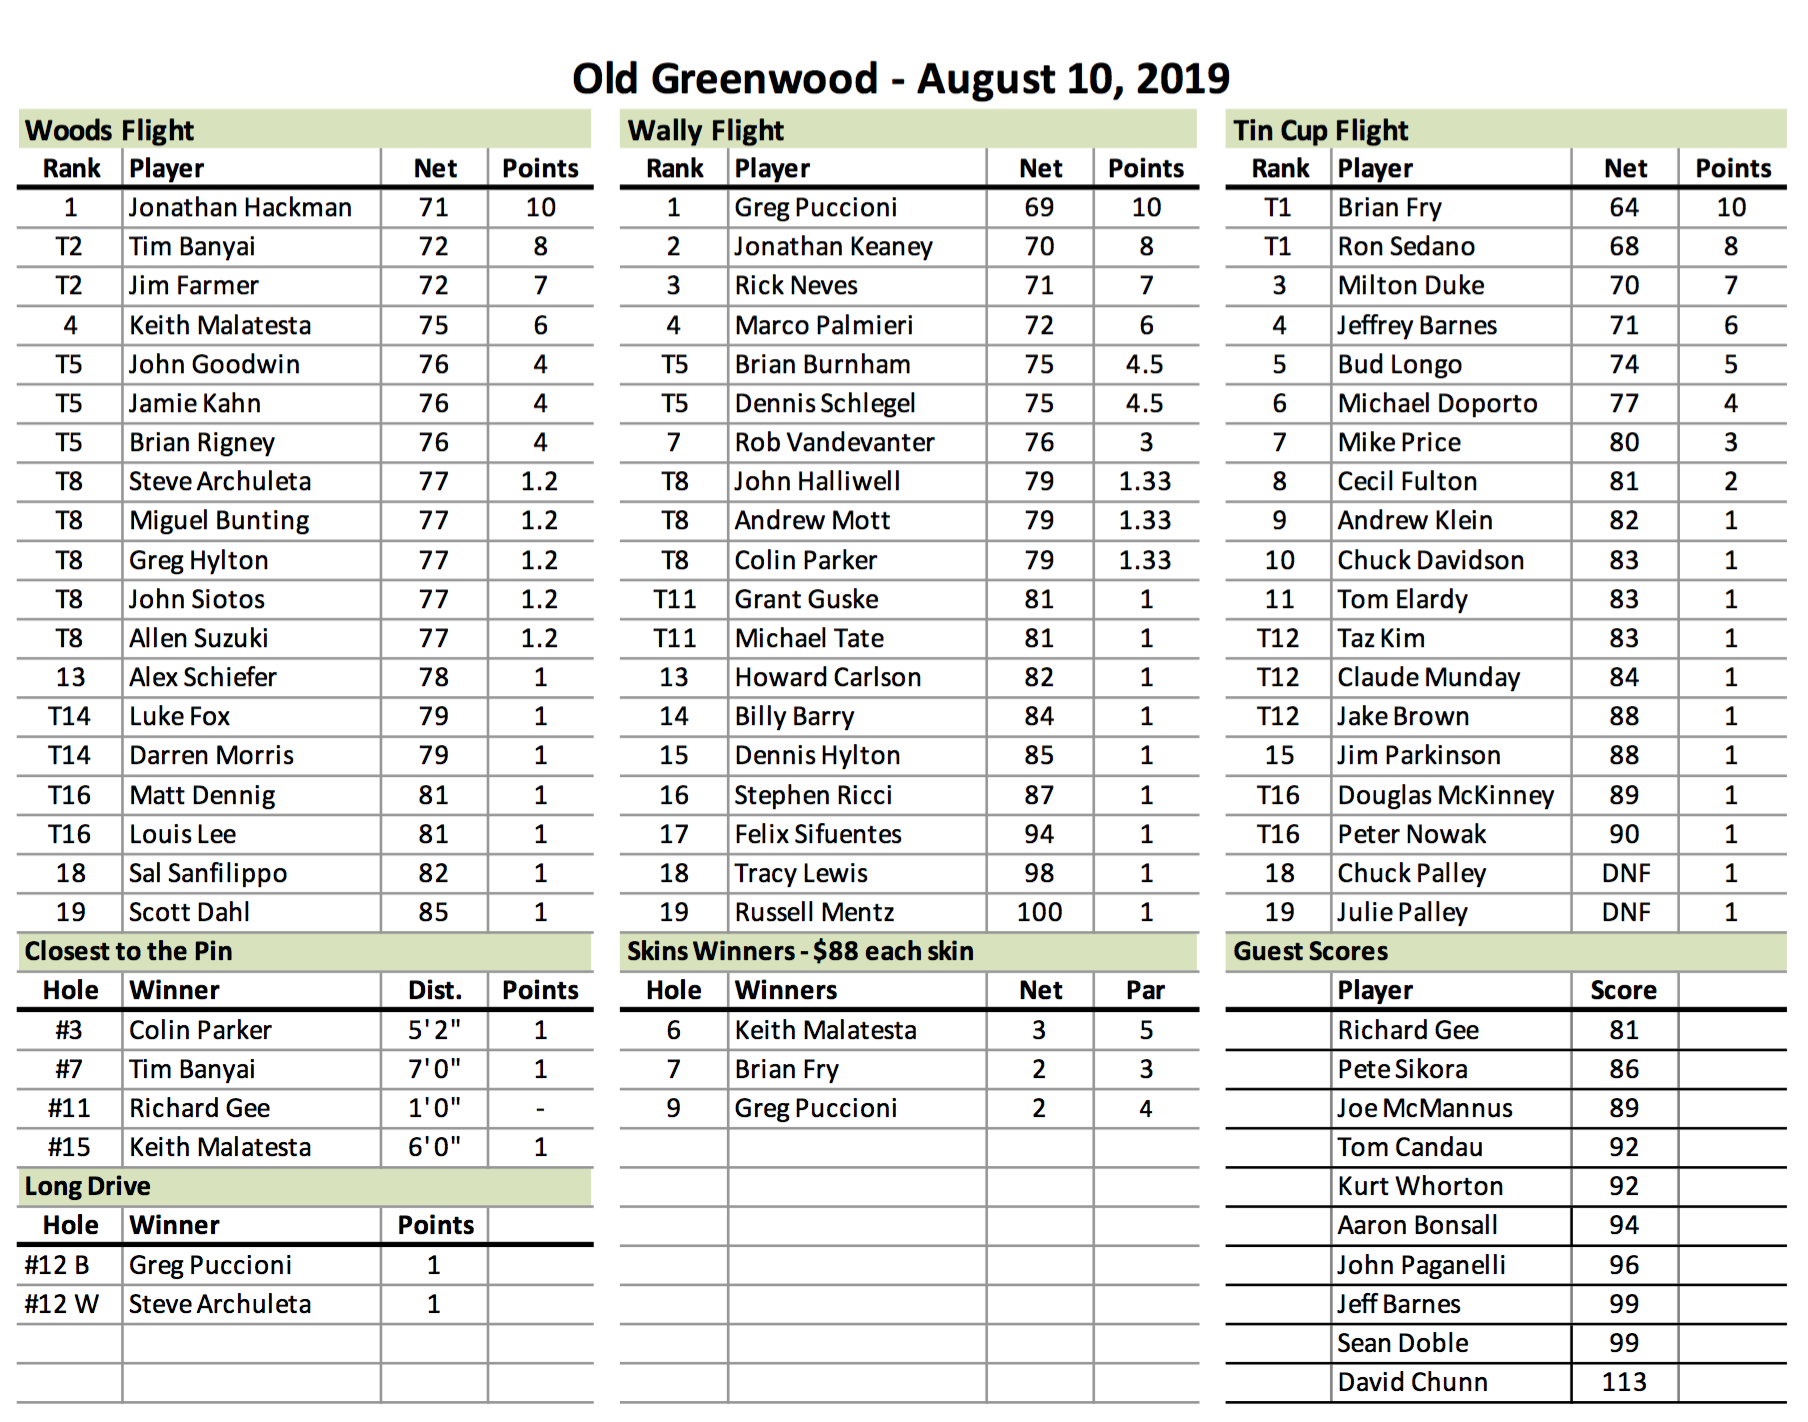 Old Greenwood Results